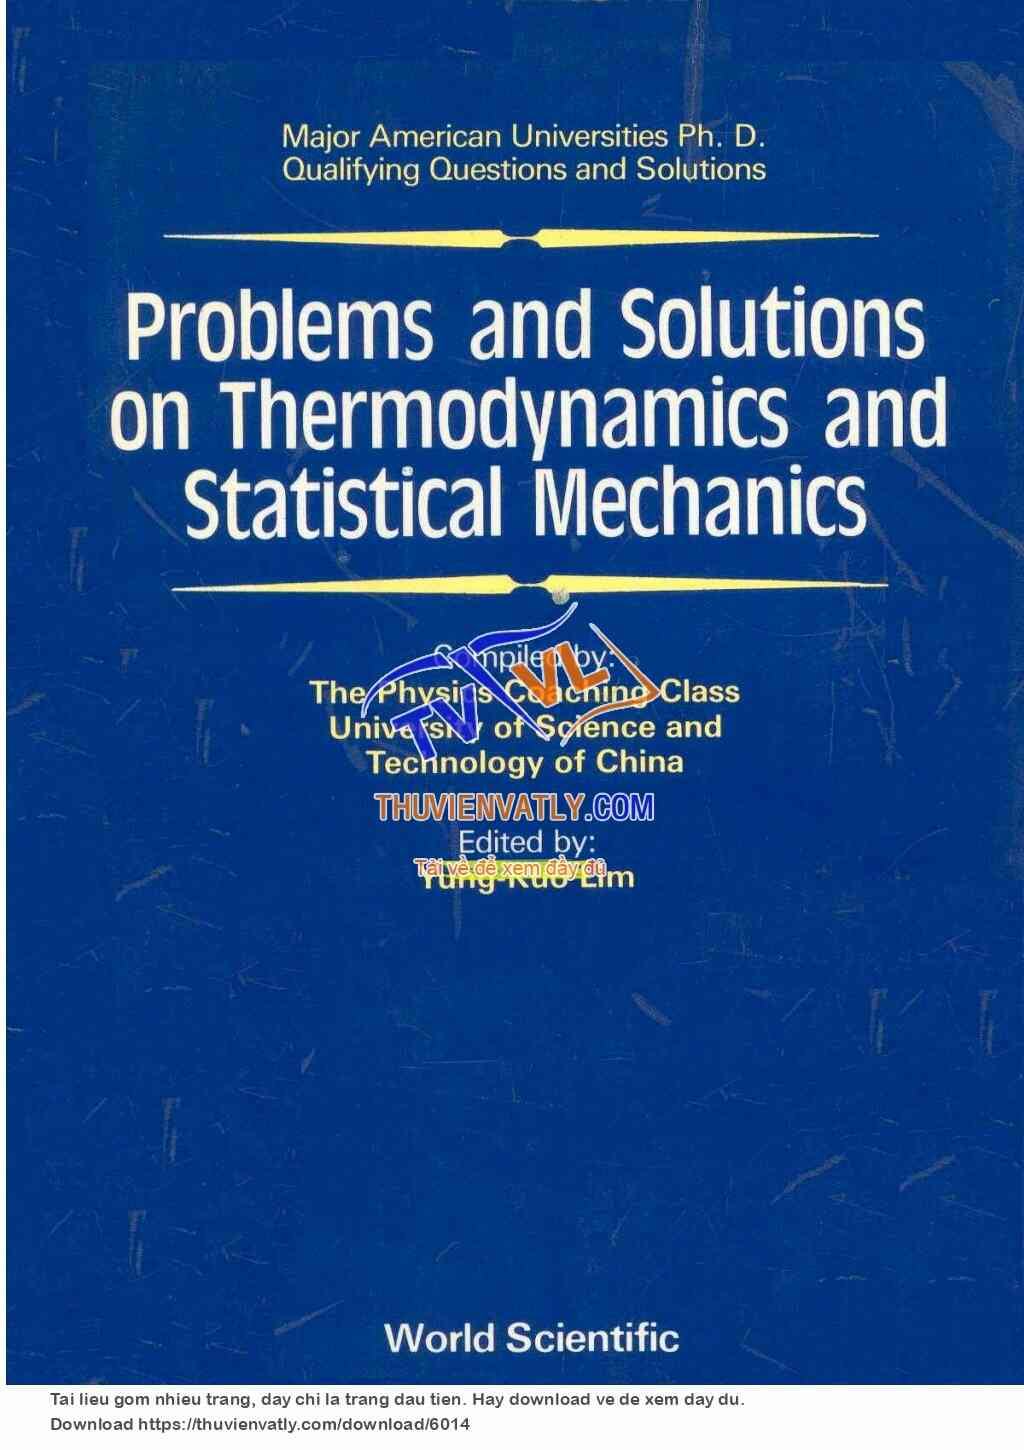 Problems and Solutions on Thermodynamics and Statistical Mechanics - Yung-Kuo Lim